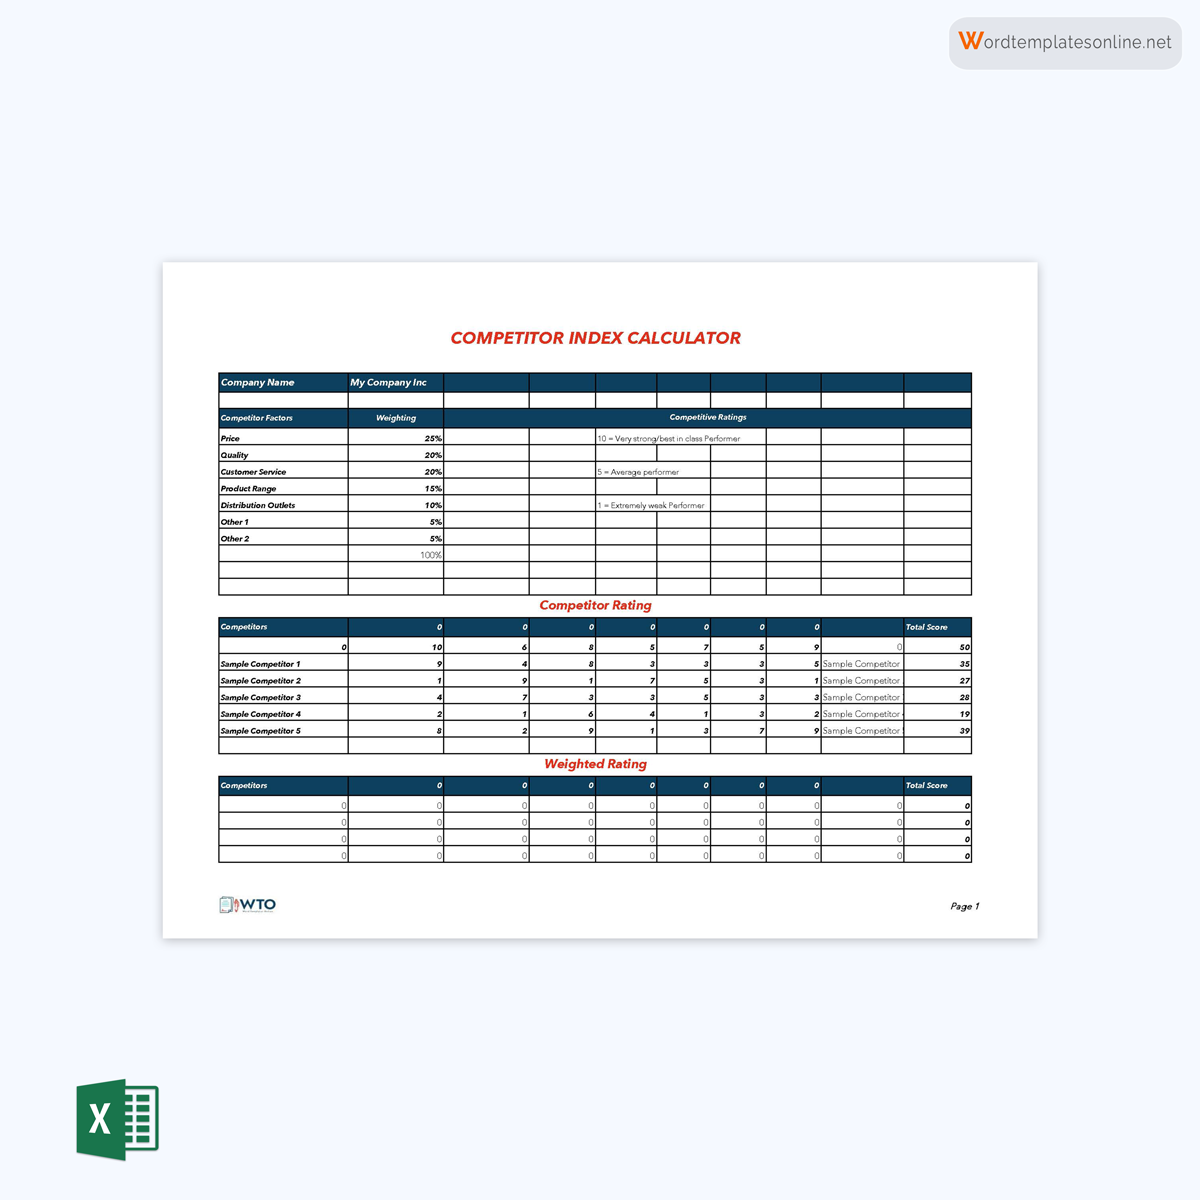 Free Downloadable Competitor Index Calculator Template for Excel format